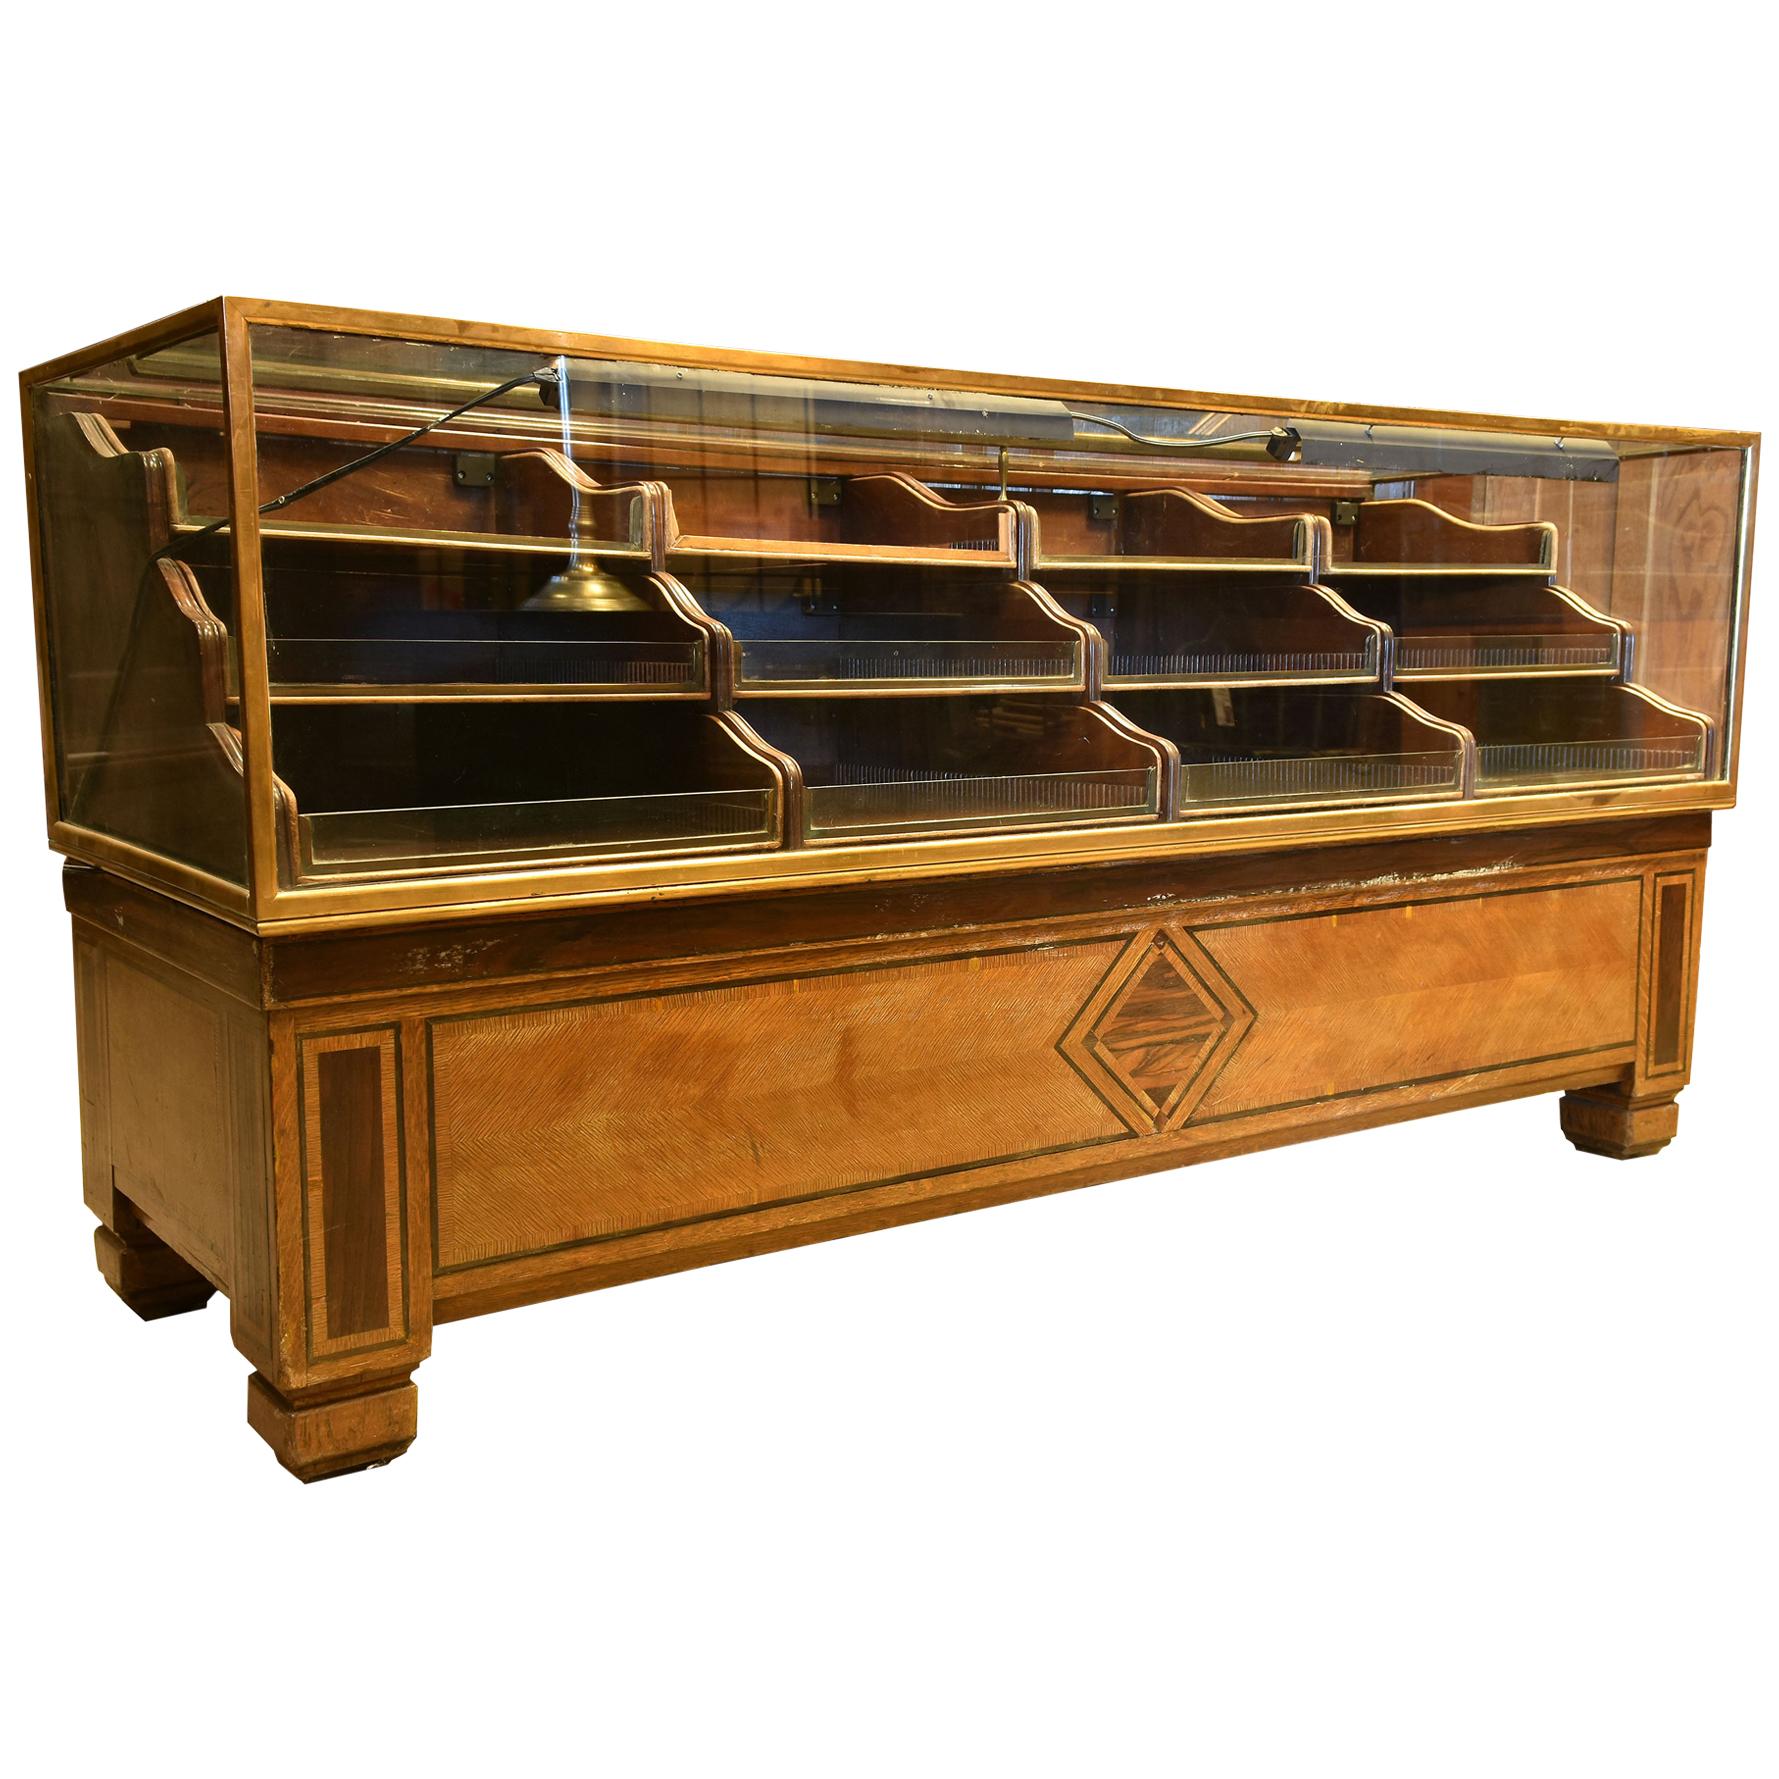 Deco Inlaid Mercantile Display Case with Shelves